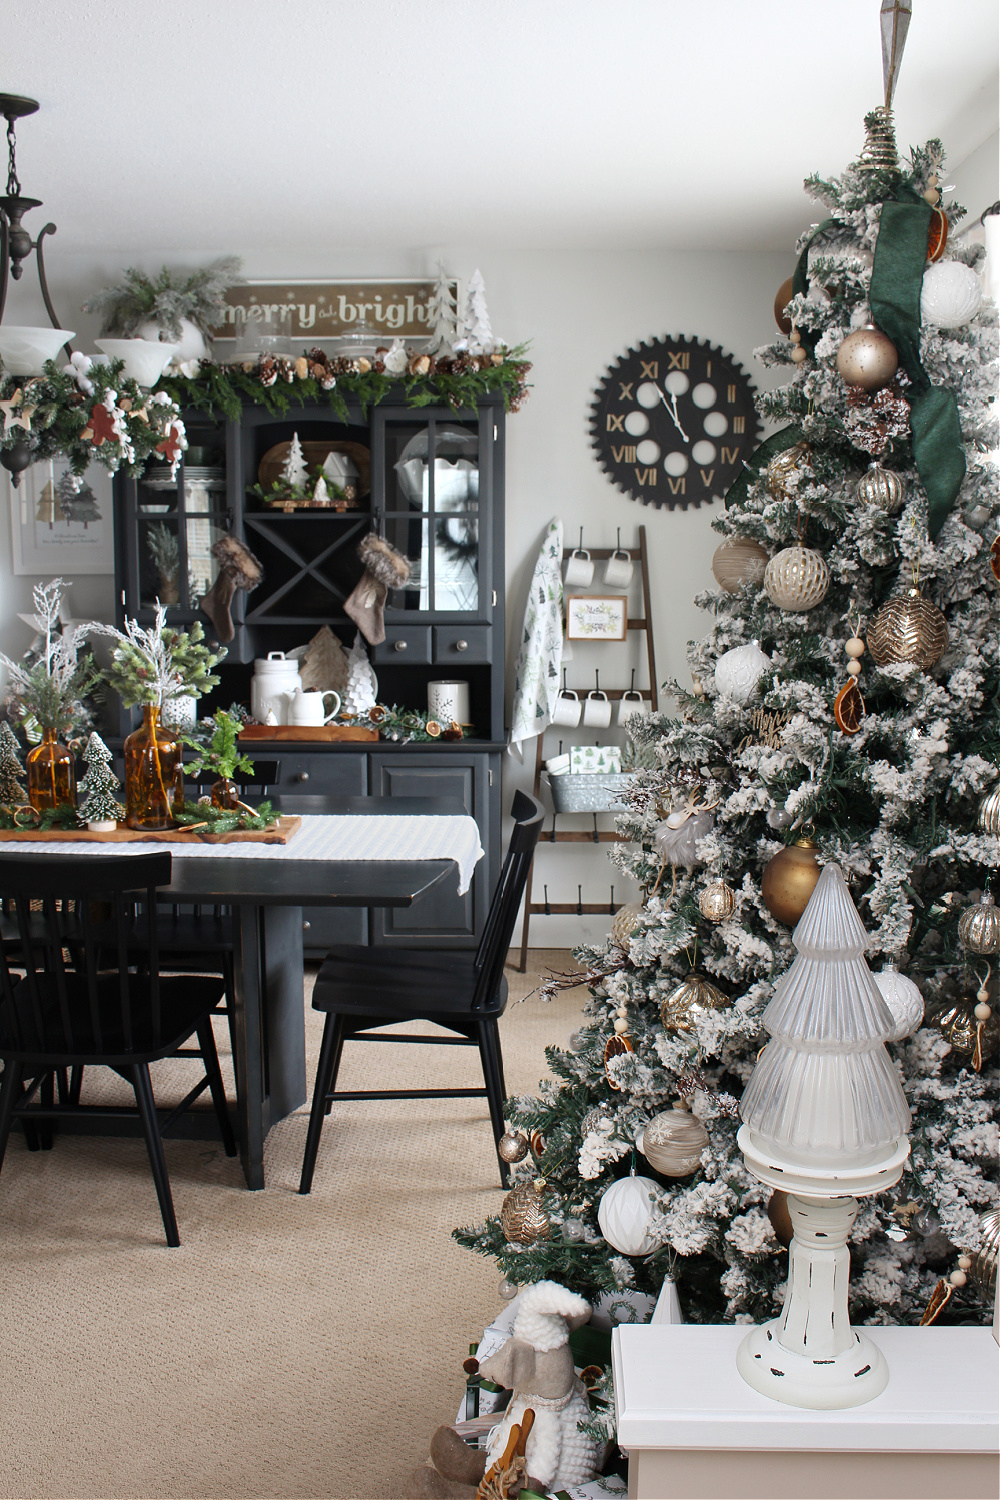 A Christmas dining room decorated in greens, amber, and metallics.